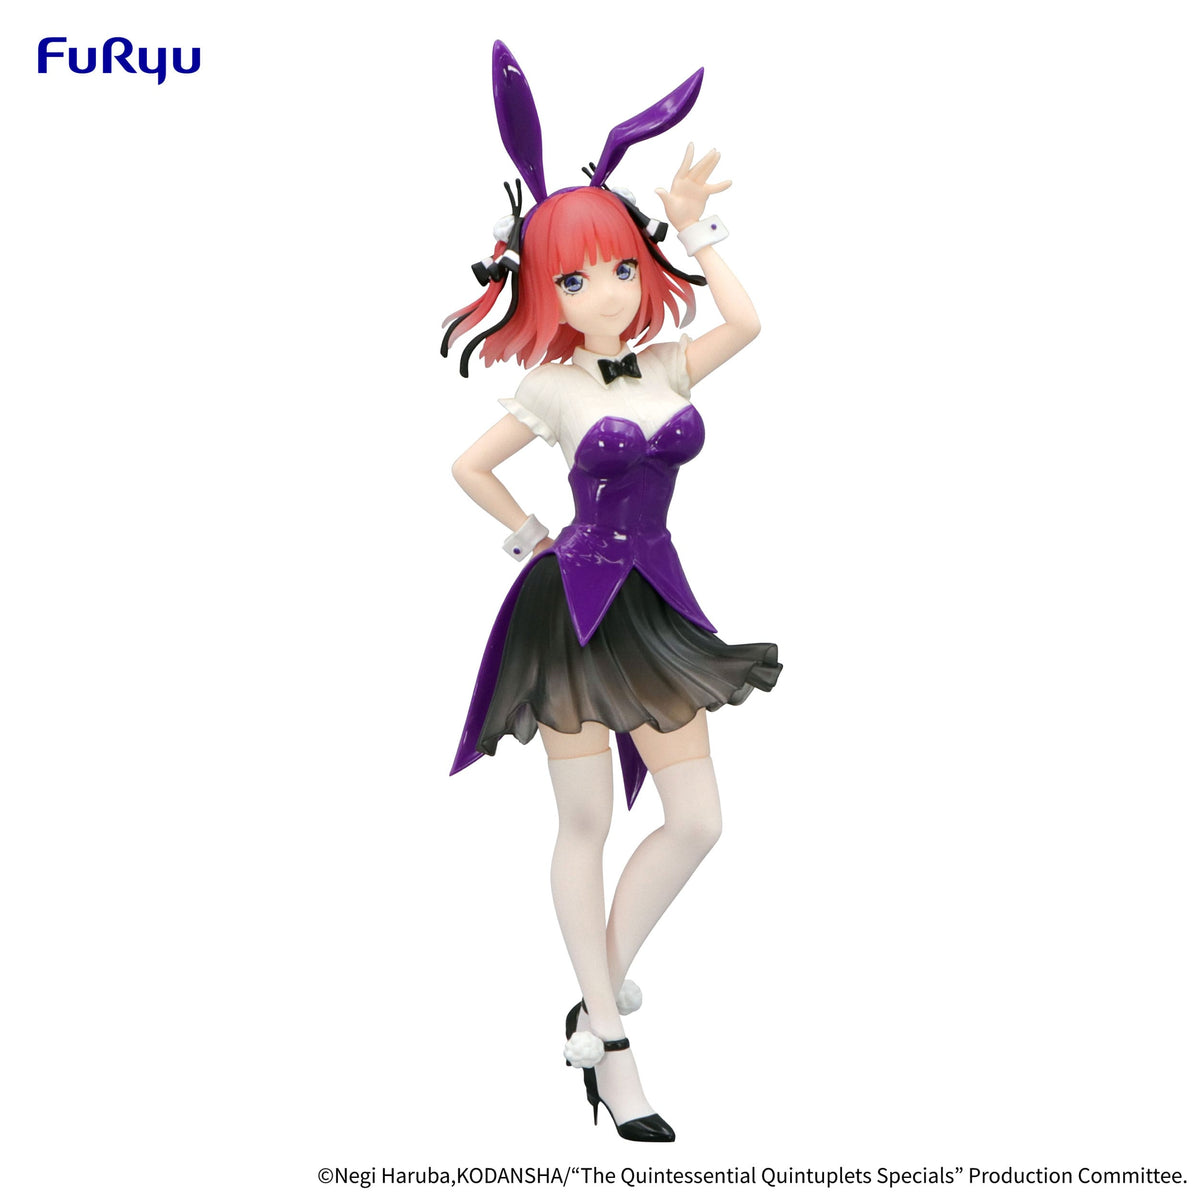 The Quintessential Quintuplets - Nino Nakano - Bunnies Another Color Trio-Try-iT Figur (Furyu)